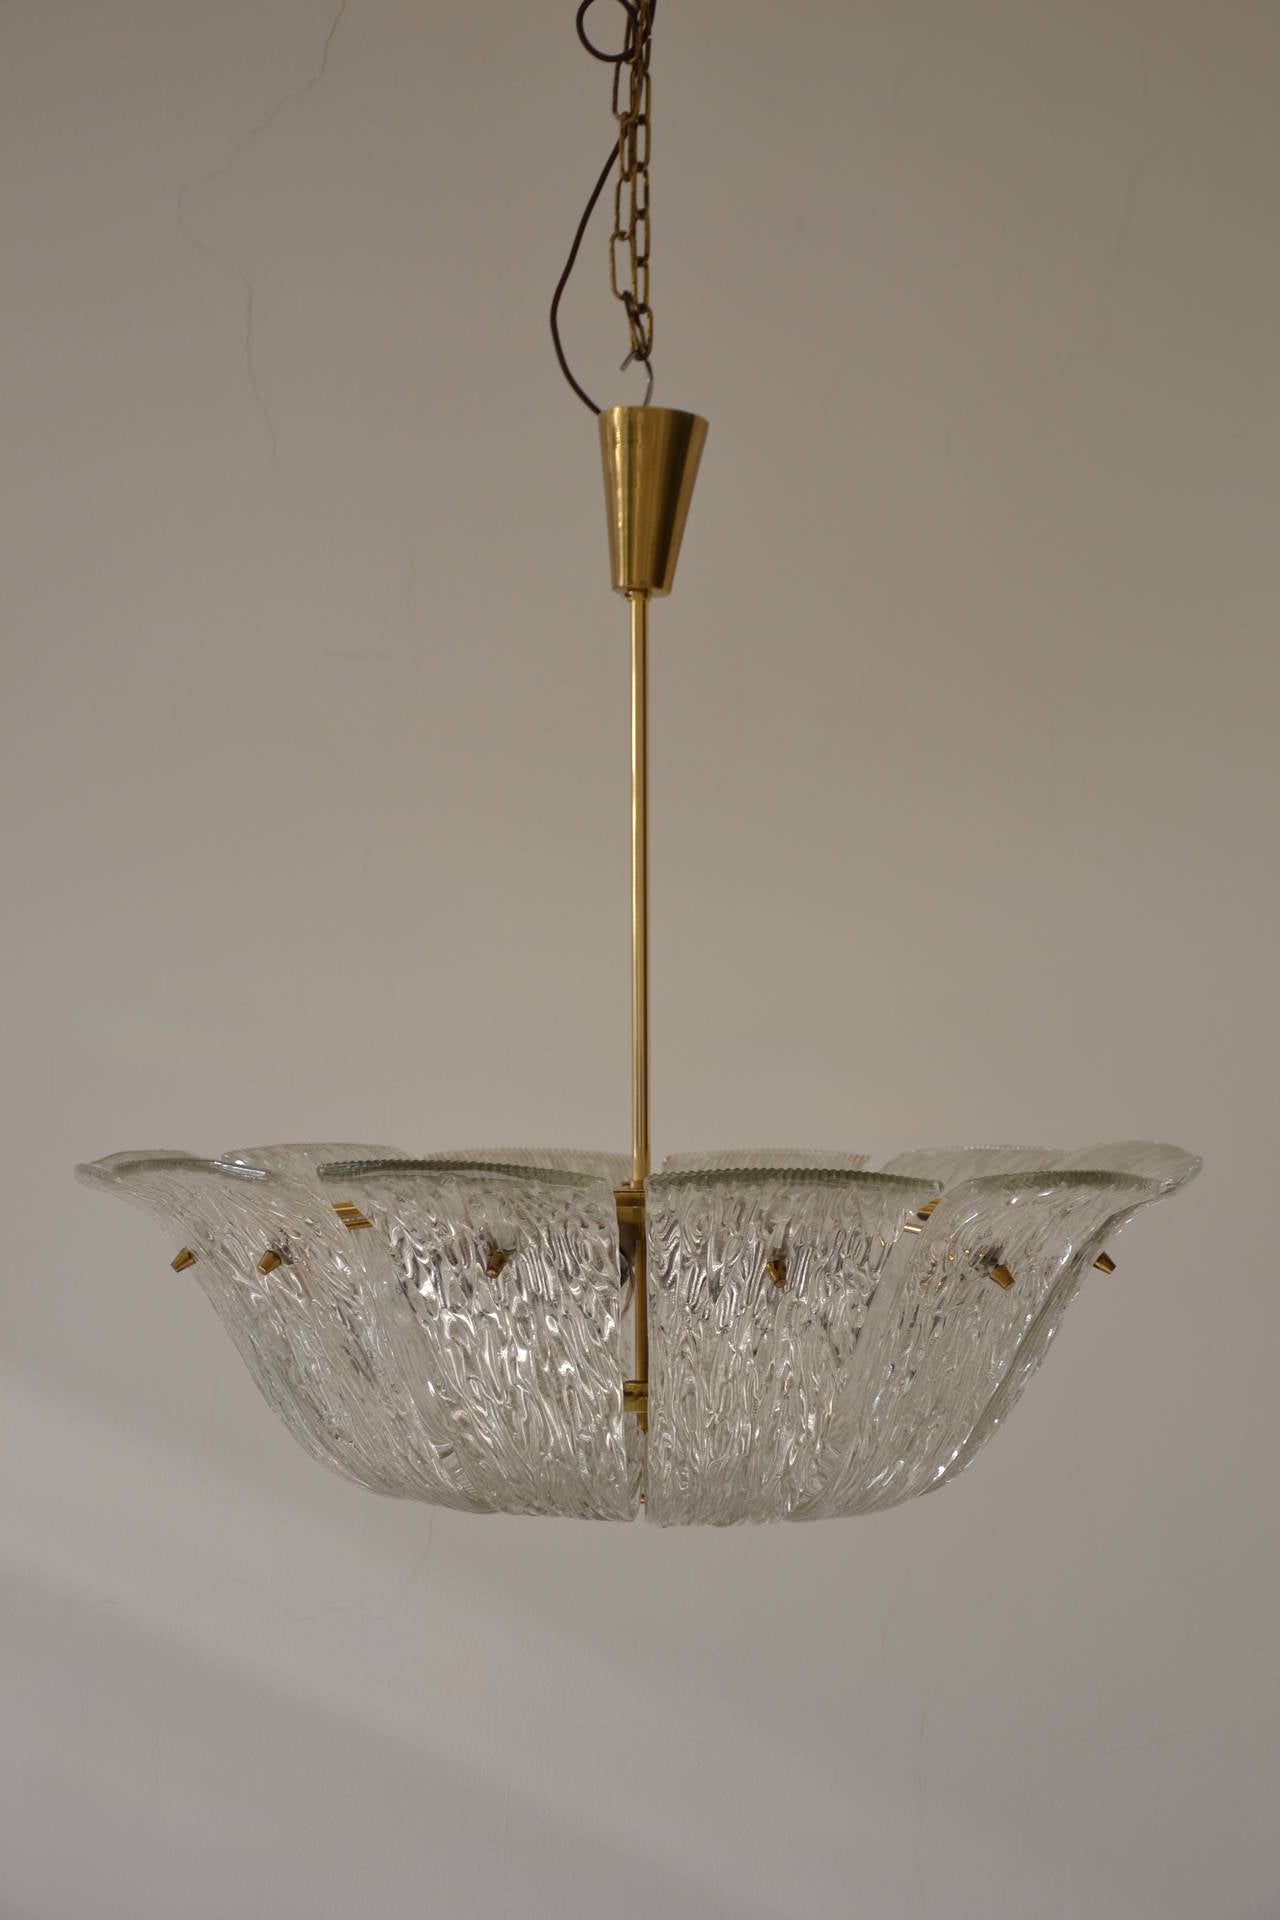 Austrian Grand Kalmar Chandelier with Curved and Textured Glass For Sale